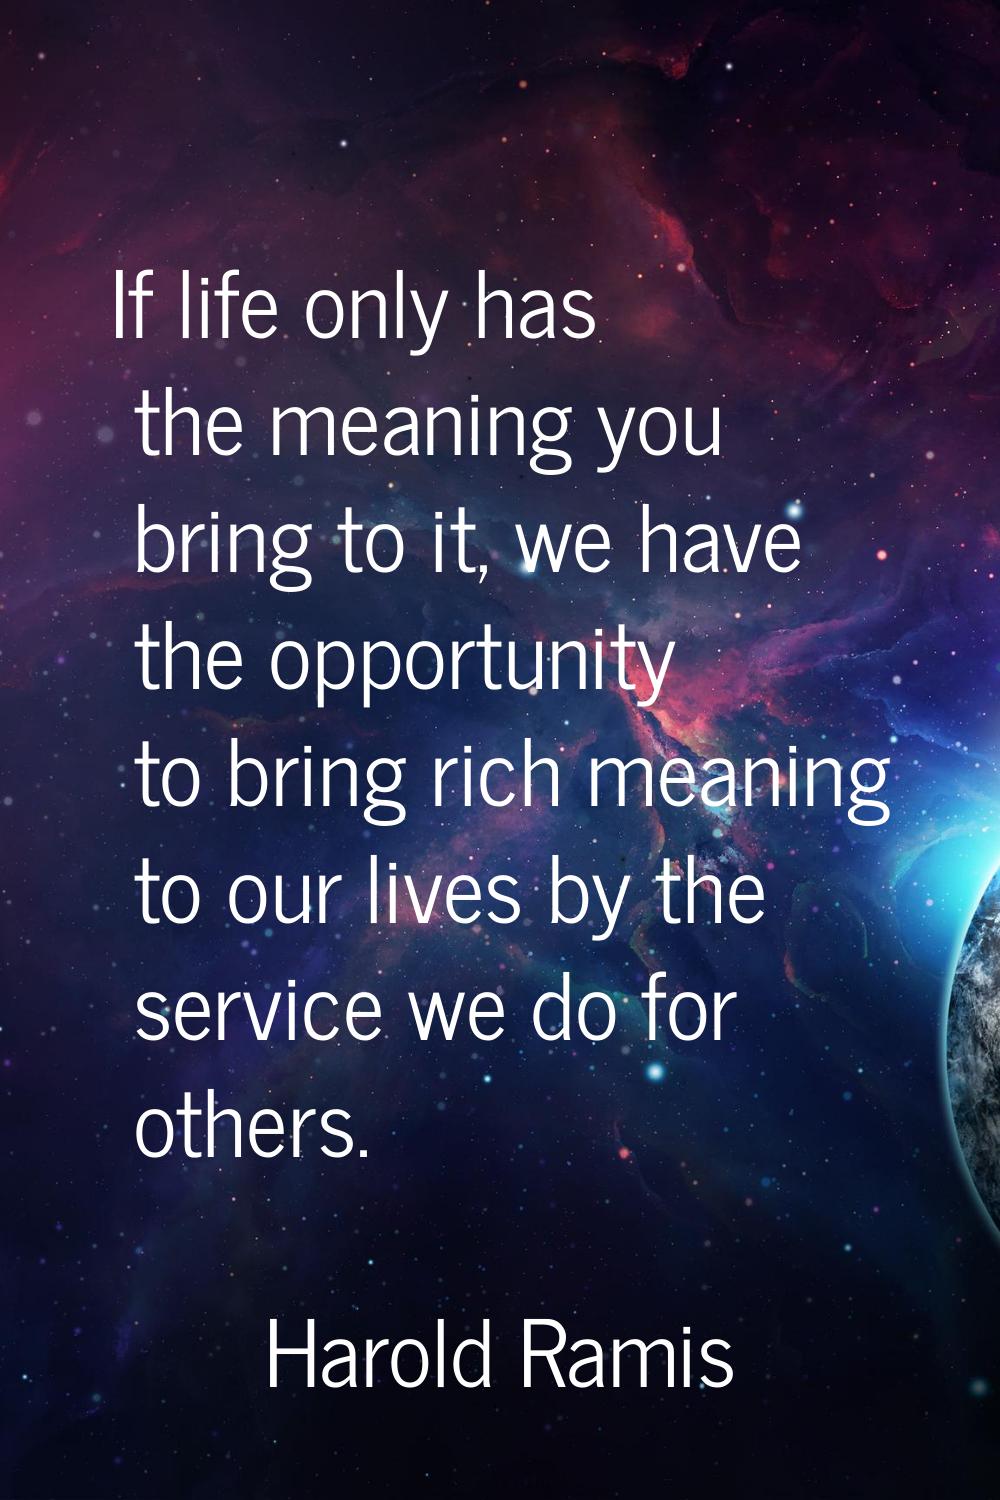 If life only has the meaning you bring to it, we have the opportunity to bring rich meaning to our 